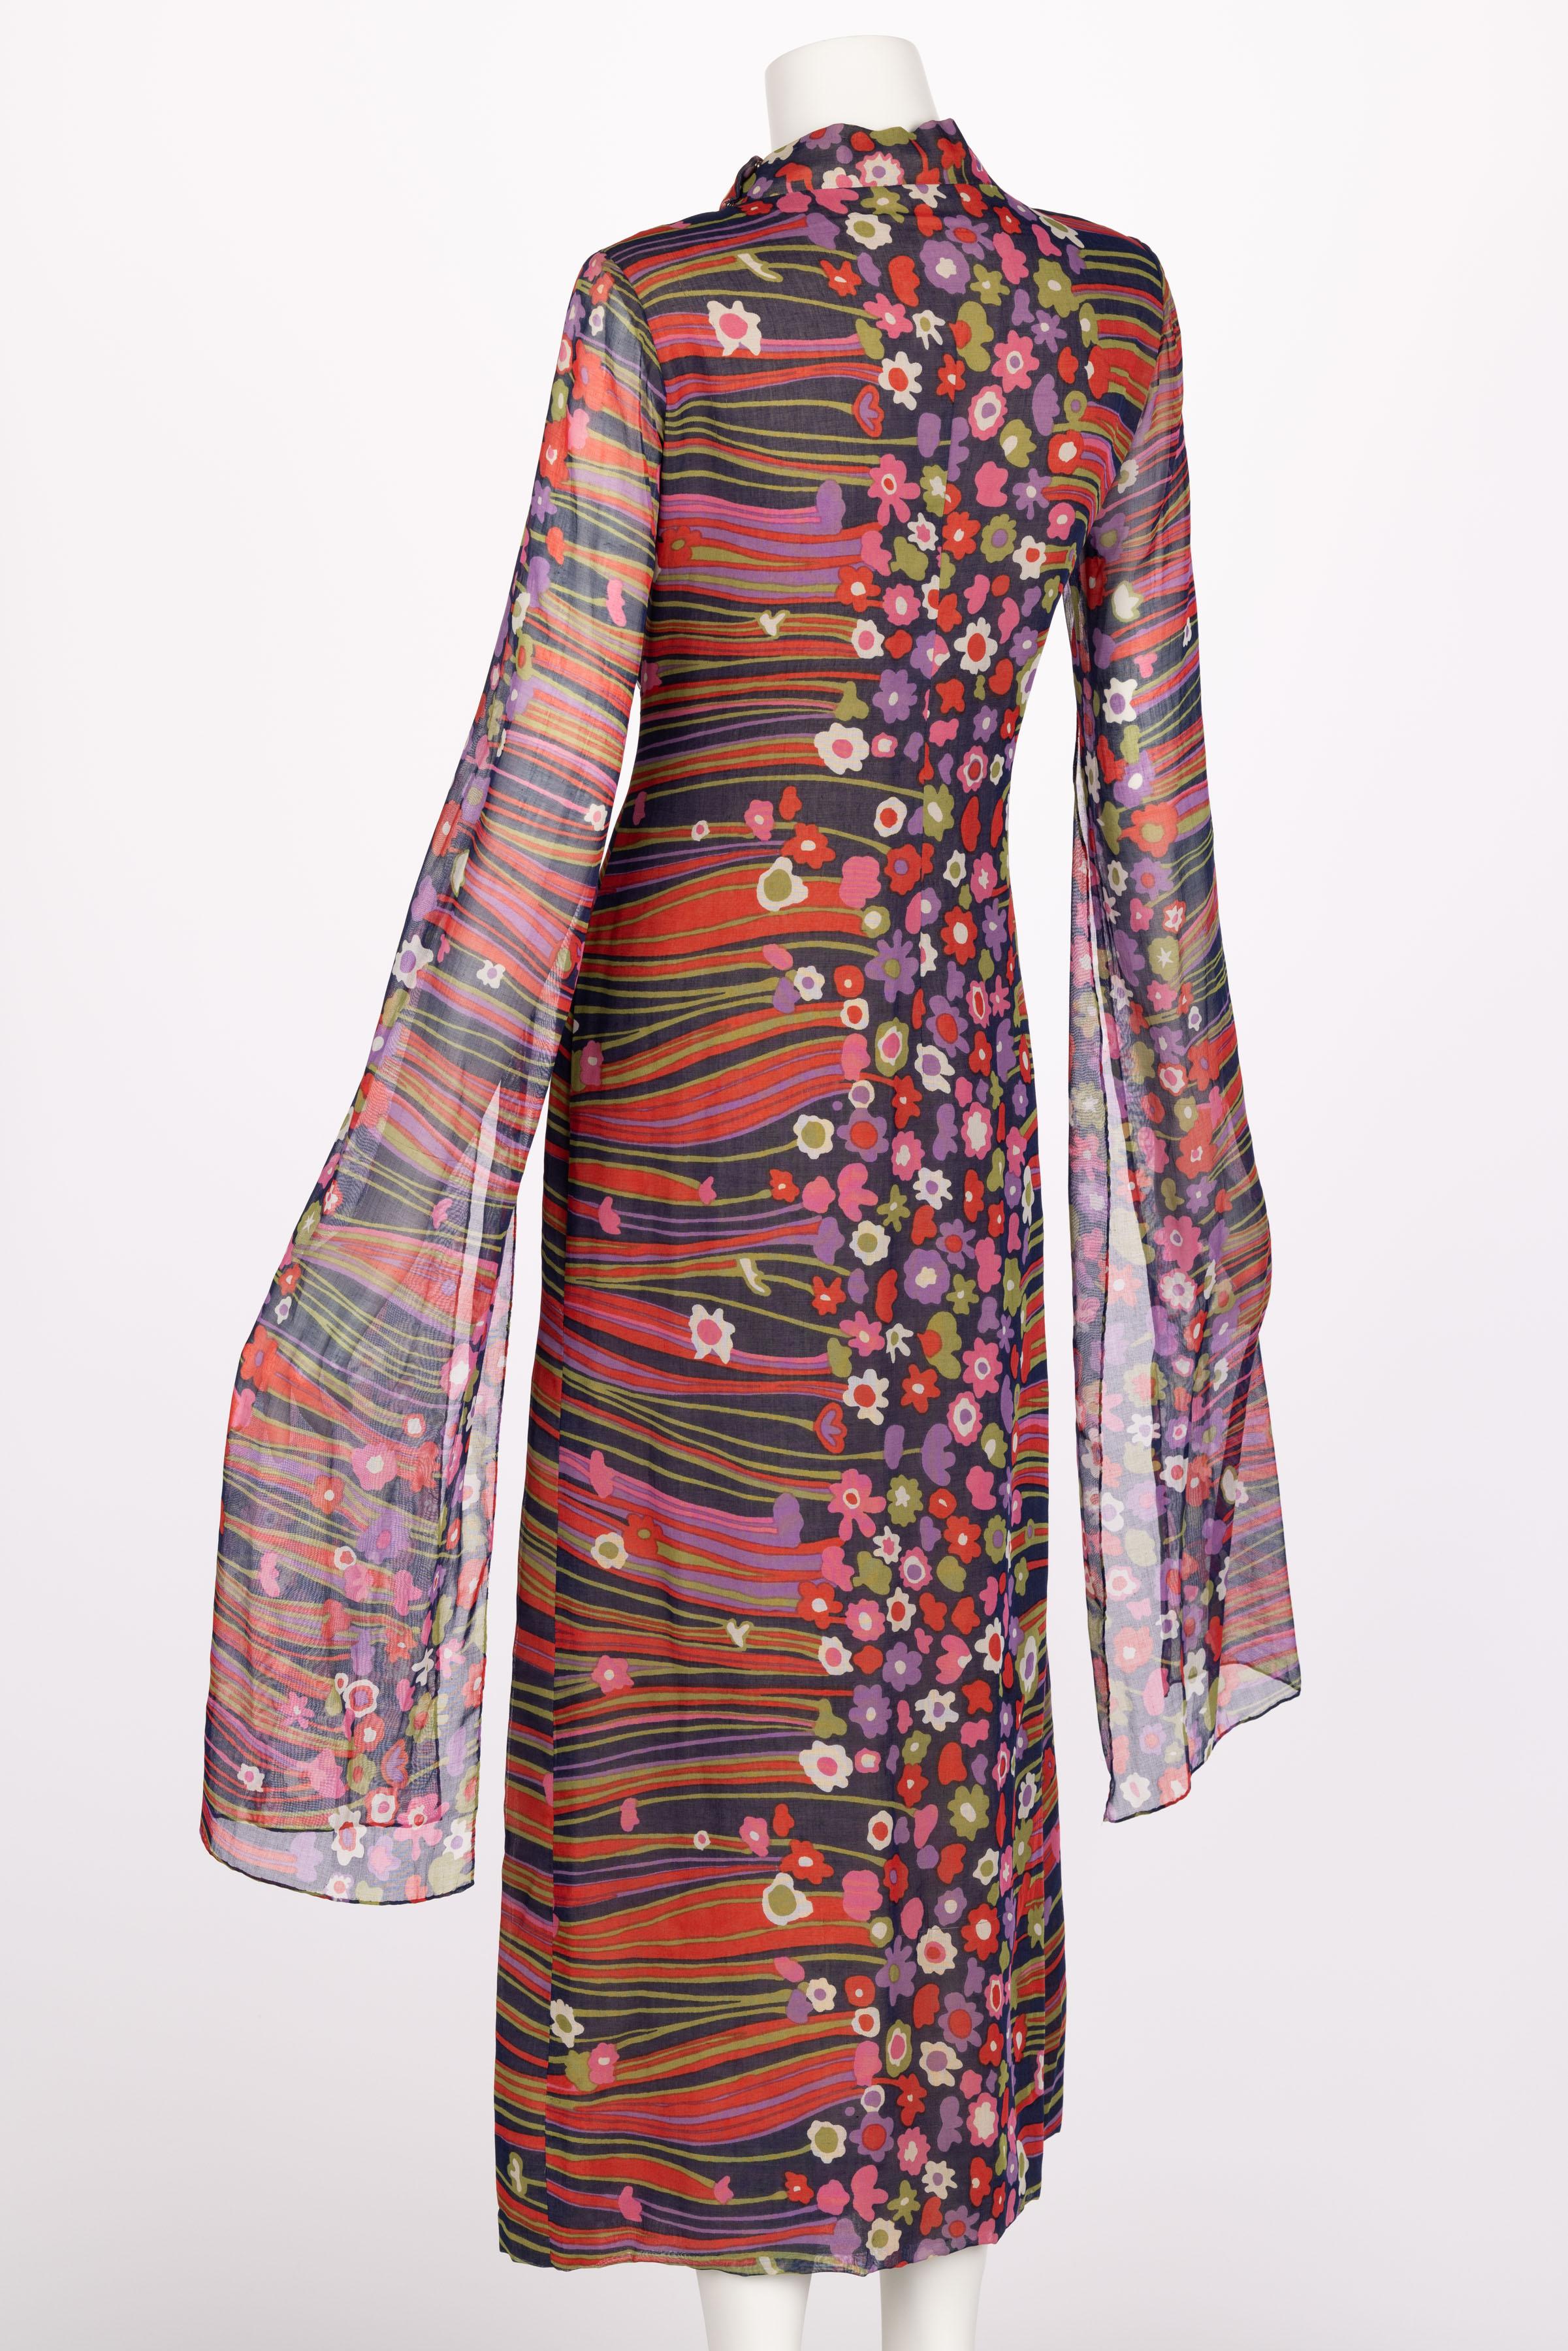 Brown Pauline Trigère Abstract Floral Print Cotton Kimono Angel-Sleeve Dress, 1960s For Sale